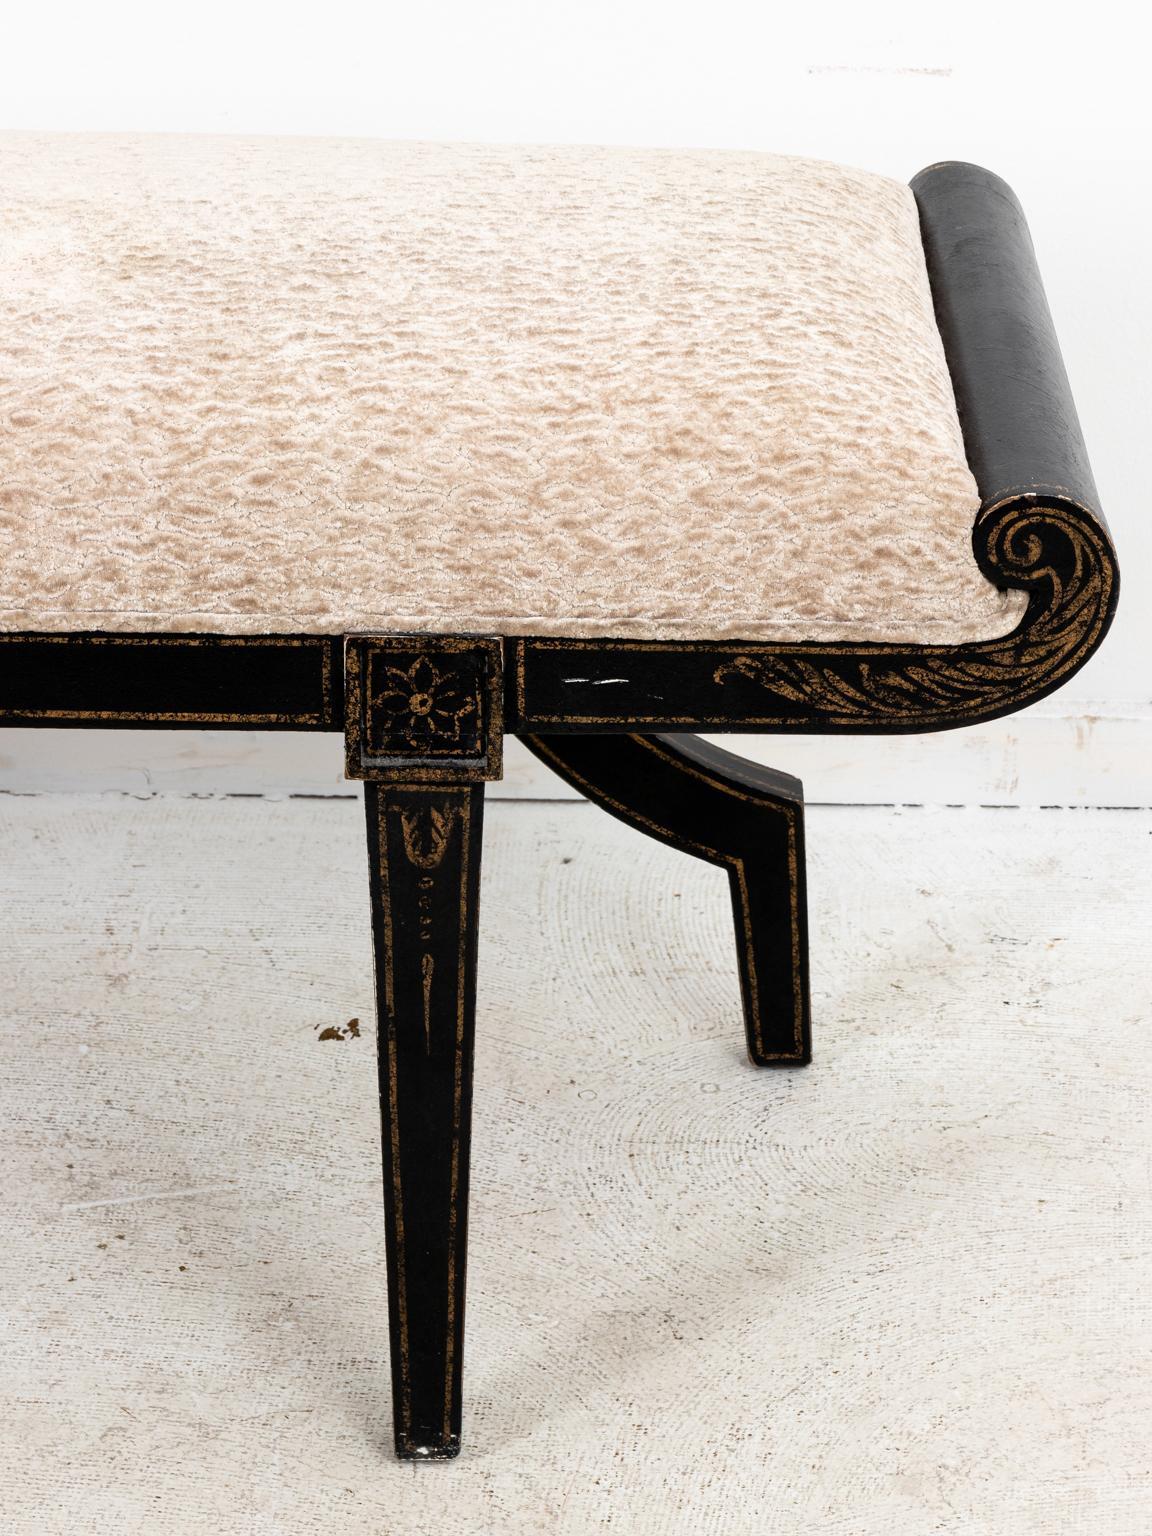 Black and gold chinoiserie style bench with upholstered seat, painted floral, and painted acanthus leaf detail on the wood frame, circa 21st century. Please note of wear consistent with age including minor chips and paint loss.